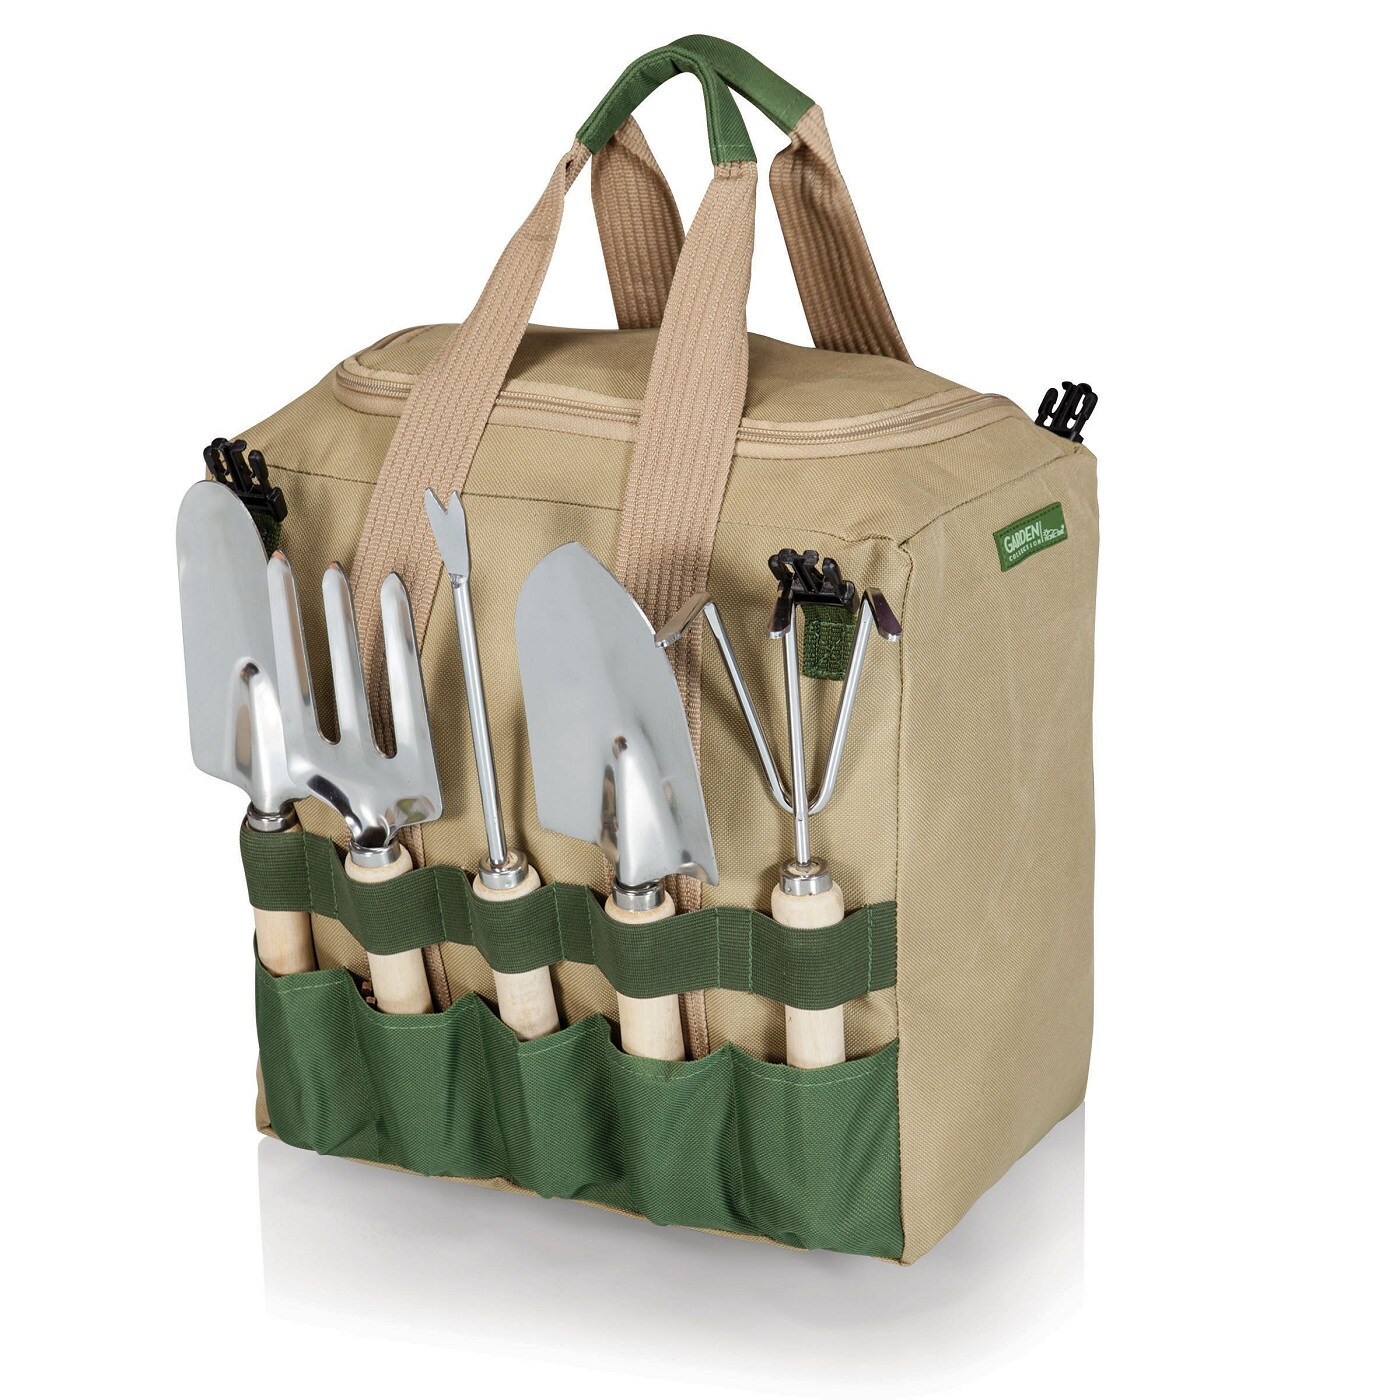 SOS ATG-PICNIC TIME in the Garden Hand Tool Kits department at Lowes.com